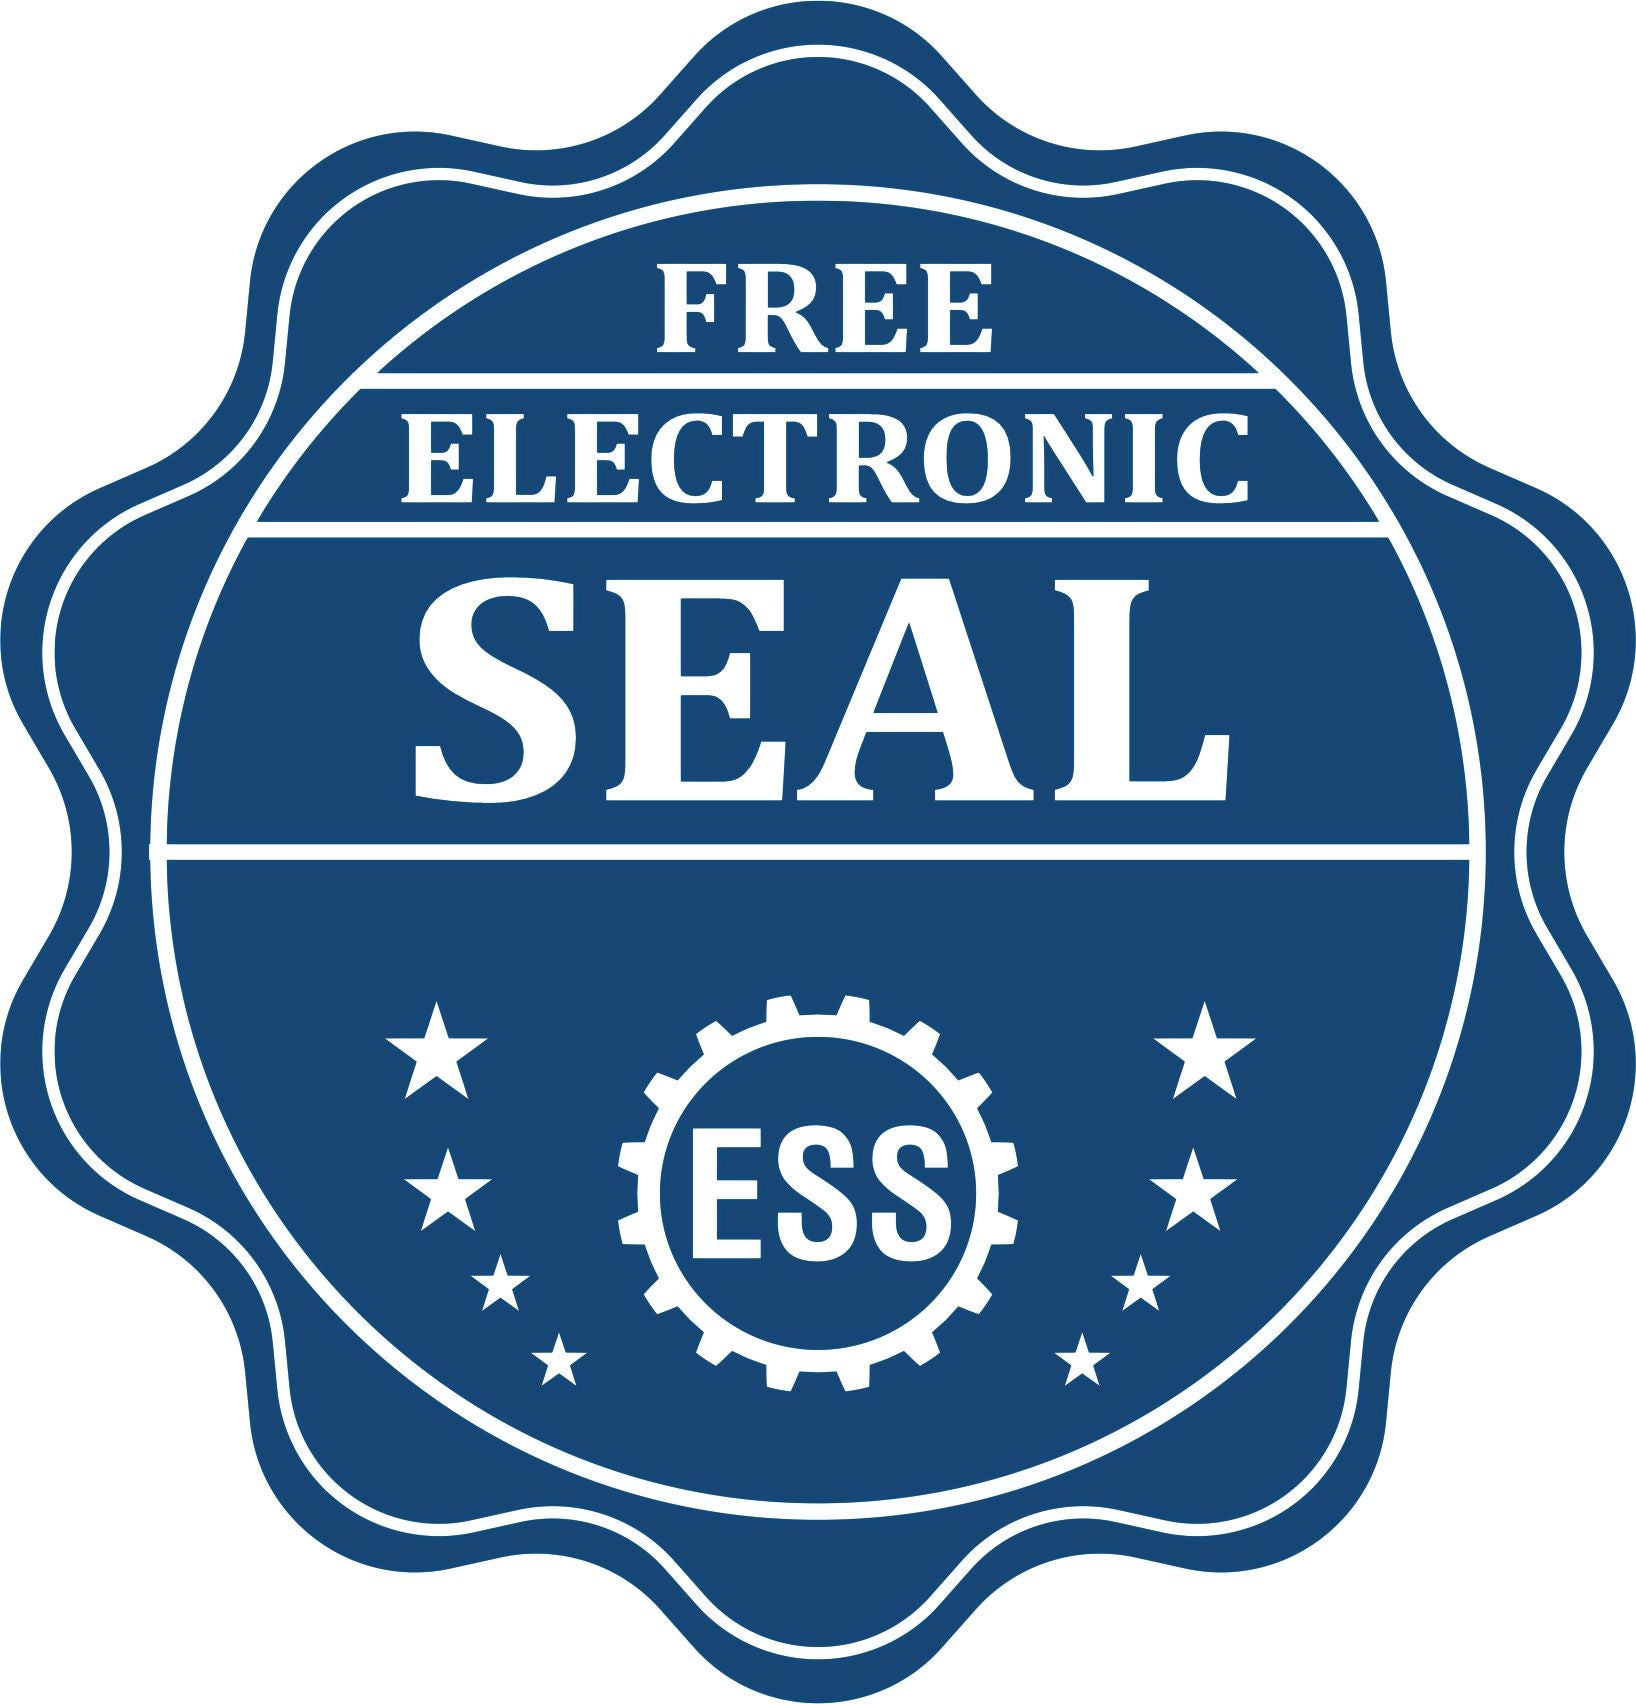 A badge showing a free electronic seal for the PSI Nebraska Notary Stamp with stars and the ESS gear on the emblem.